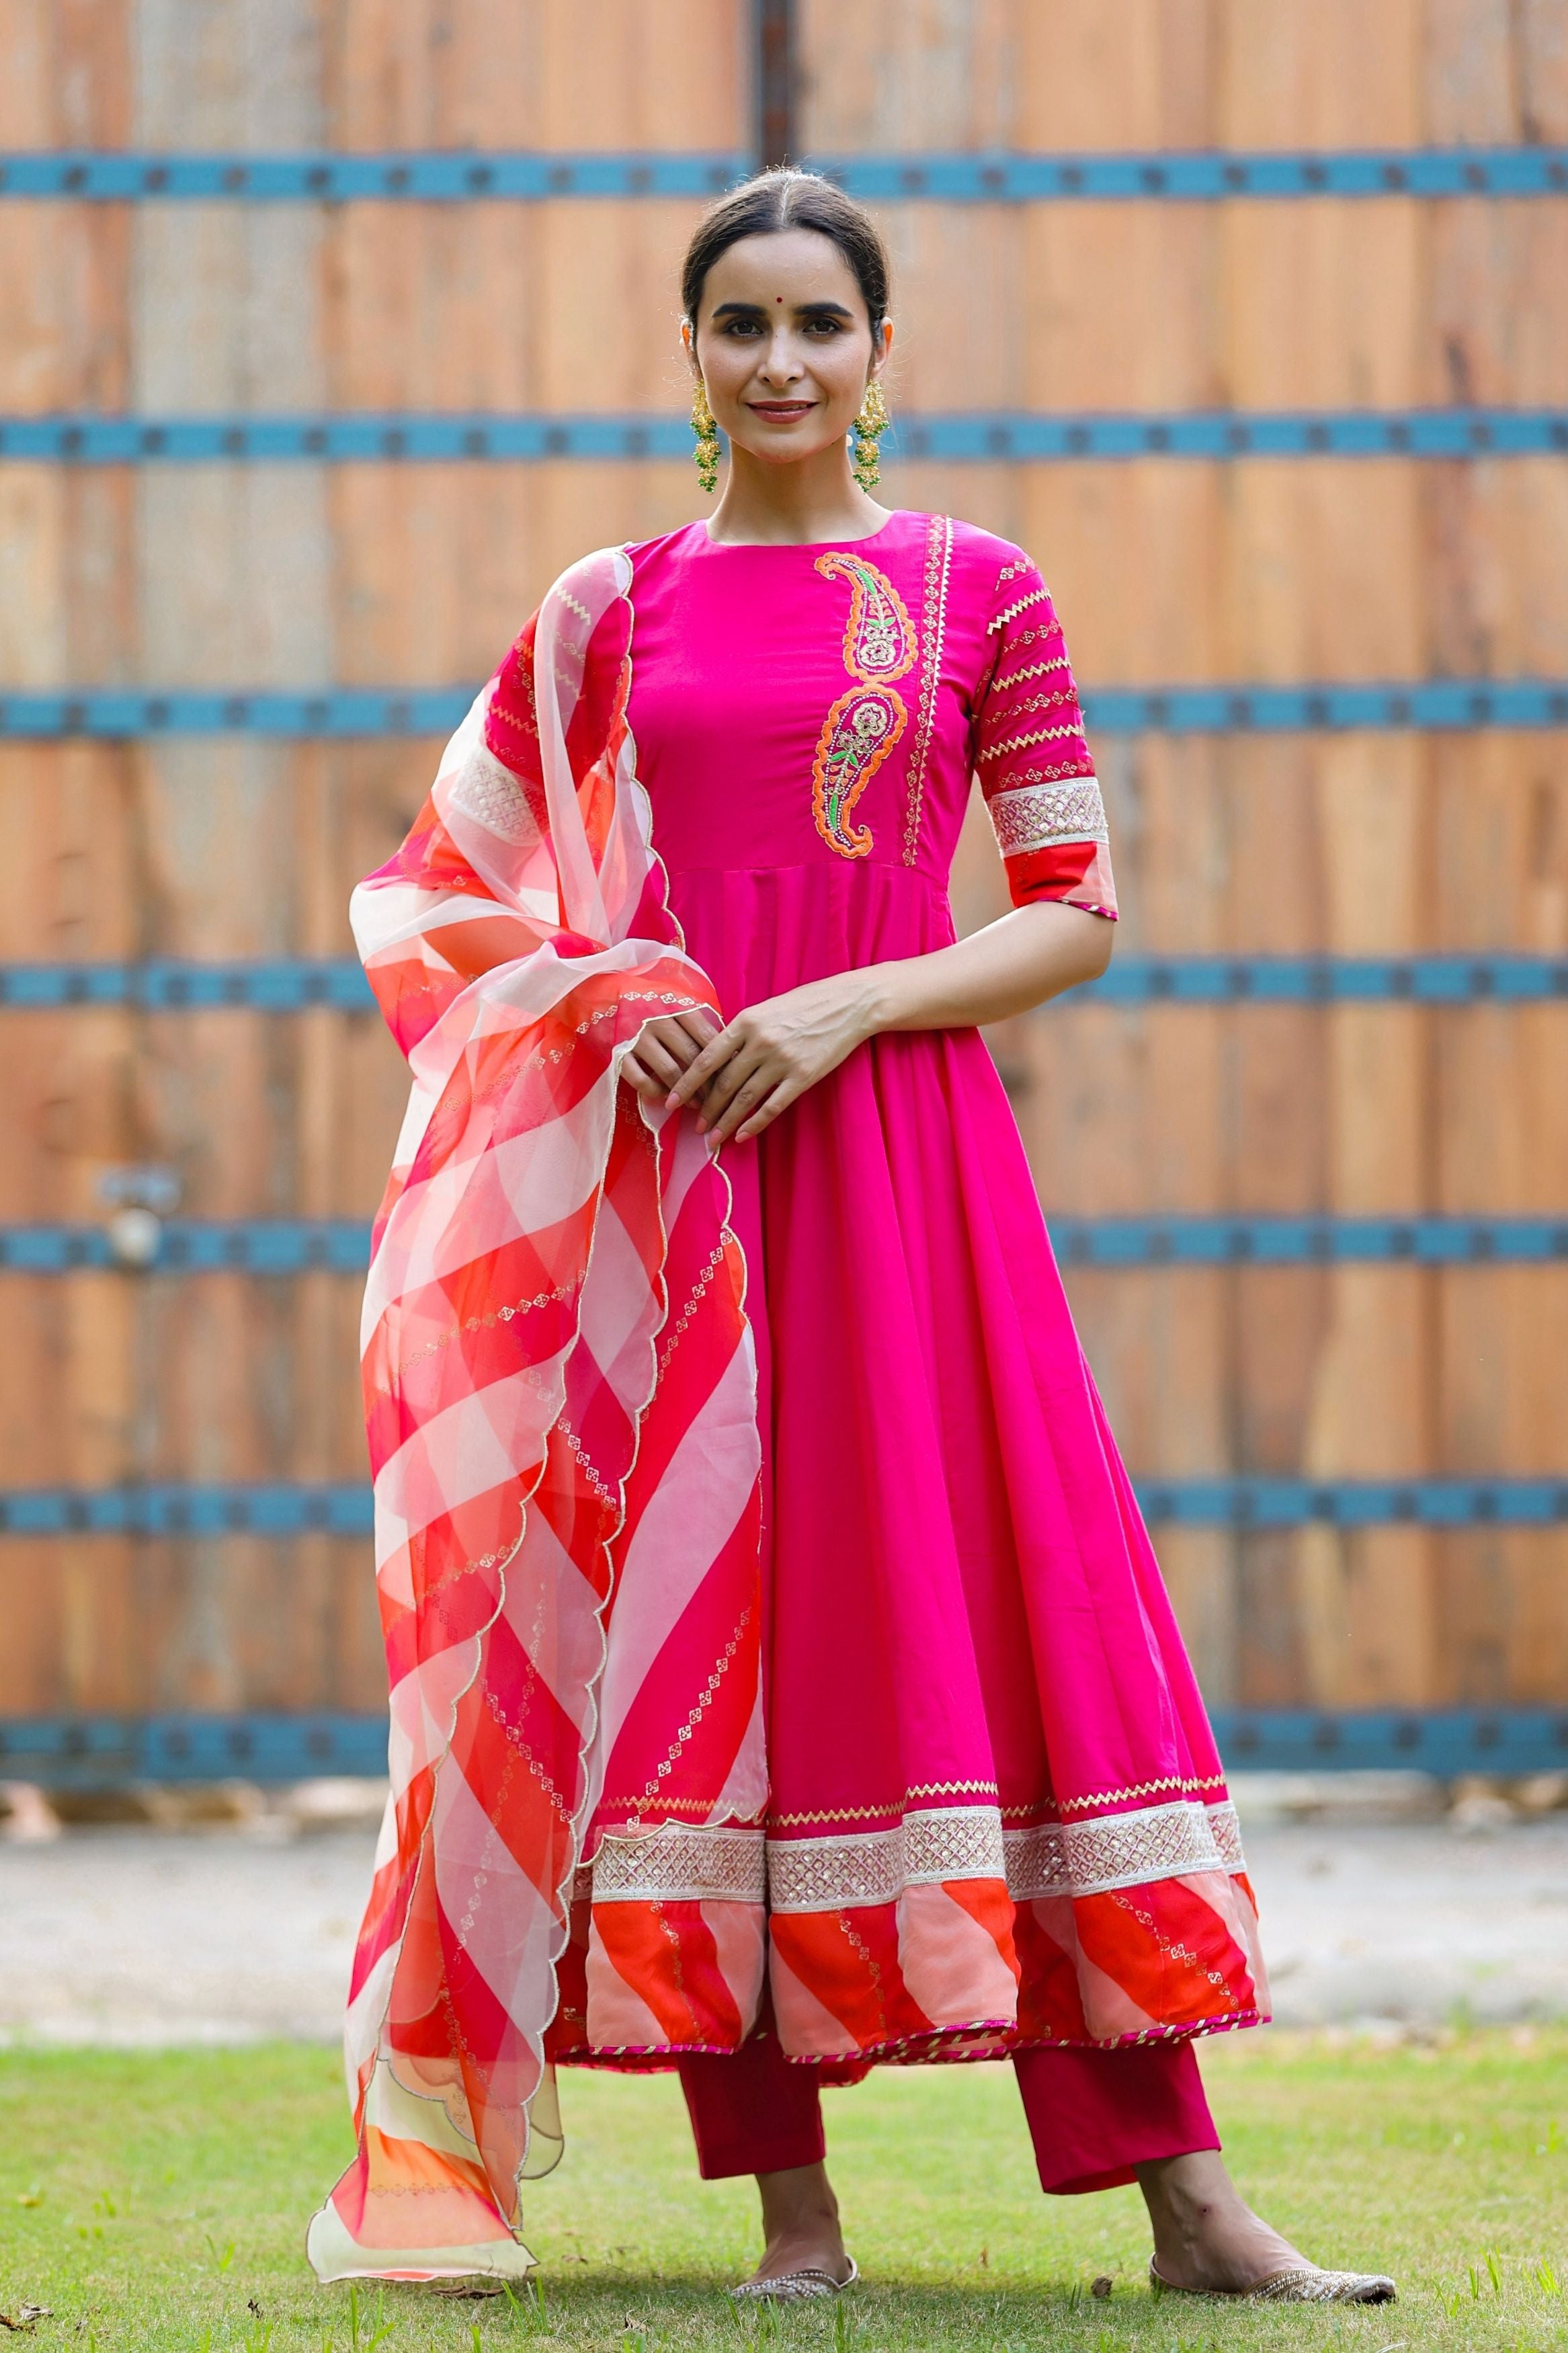 The Timeless Style of the Salwar Kameez